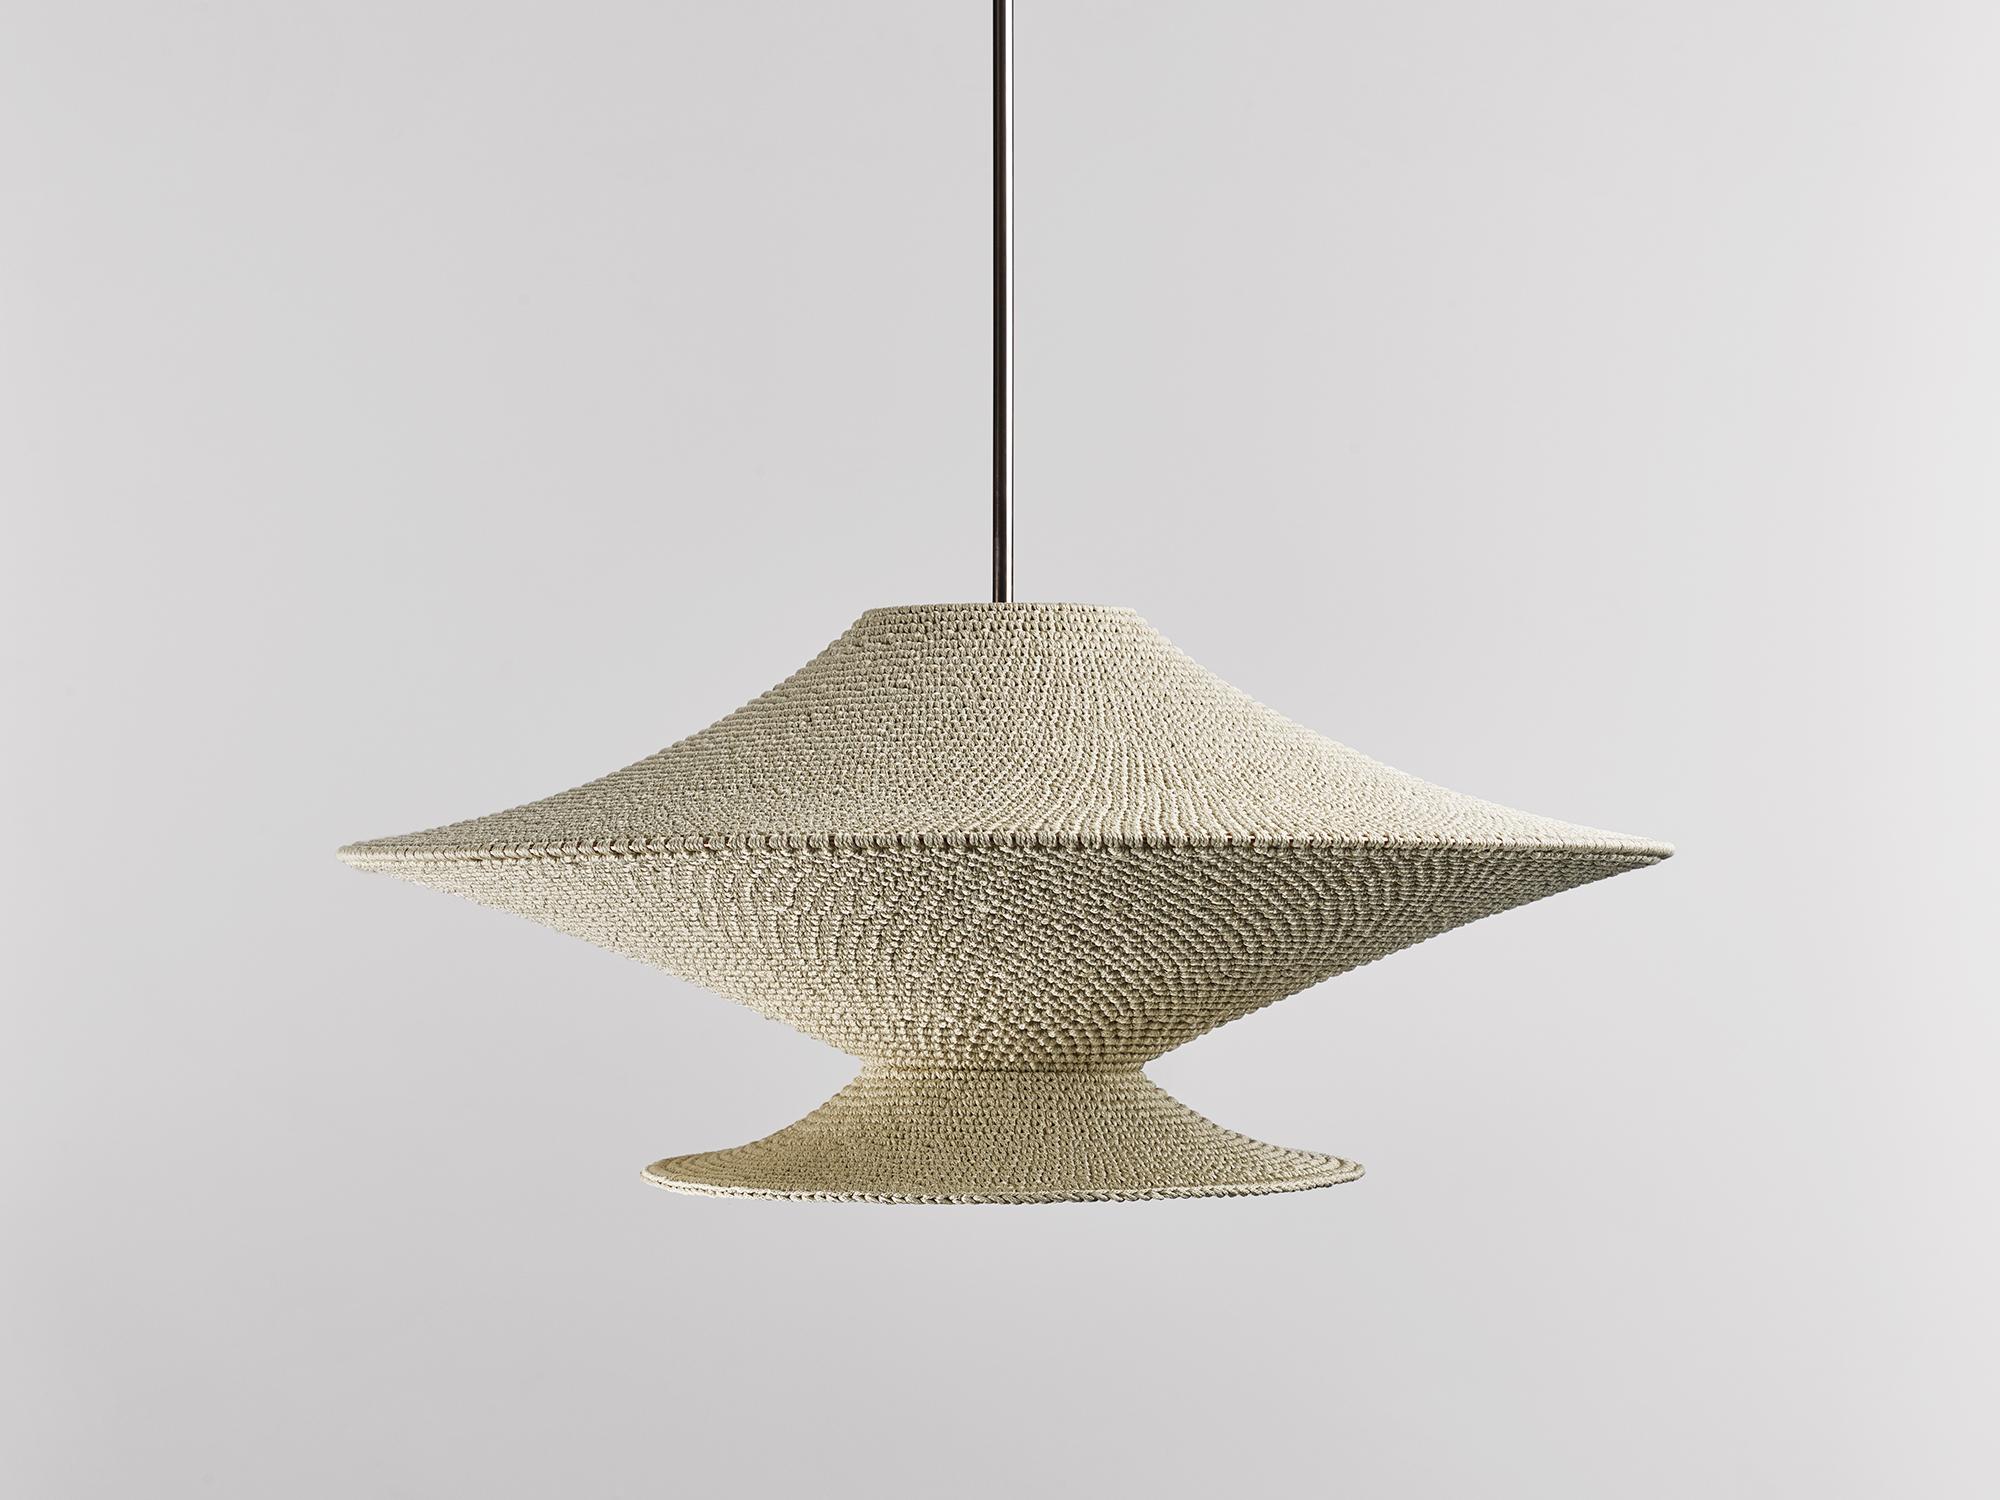 Large Jupe solitaire pendant lamp by Naomi Paul
Dimensions: D 80 x H 44 cm
Materials: Metal frame, Egyptian cotton cord.
Color: Ecru.
Available in other colors and in 4 sizes: D50, D60, D80, D100 cm.
Available in plain, two tone or bamboo color